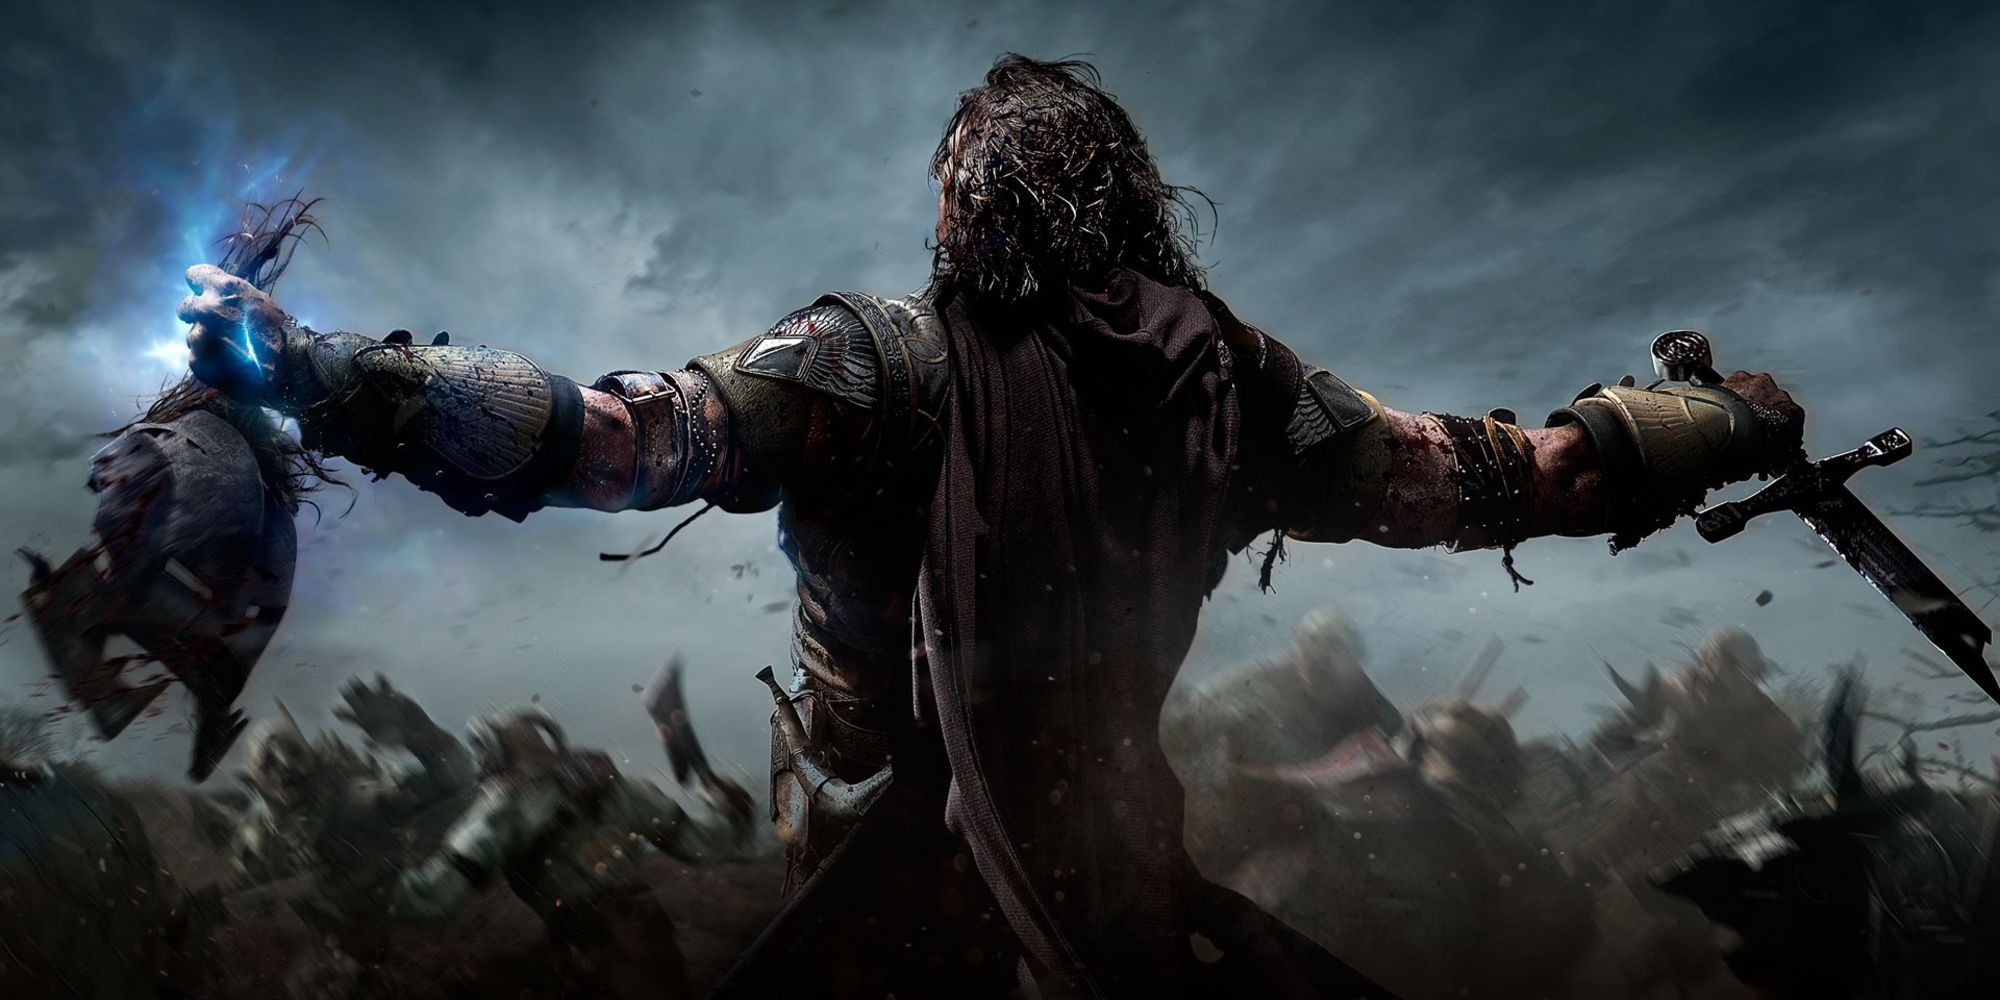 Middle-Earth: Shadow Of Mordor game image.